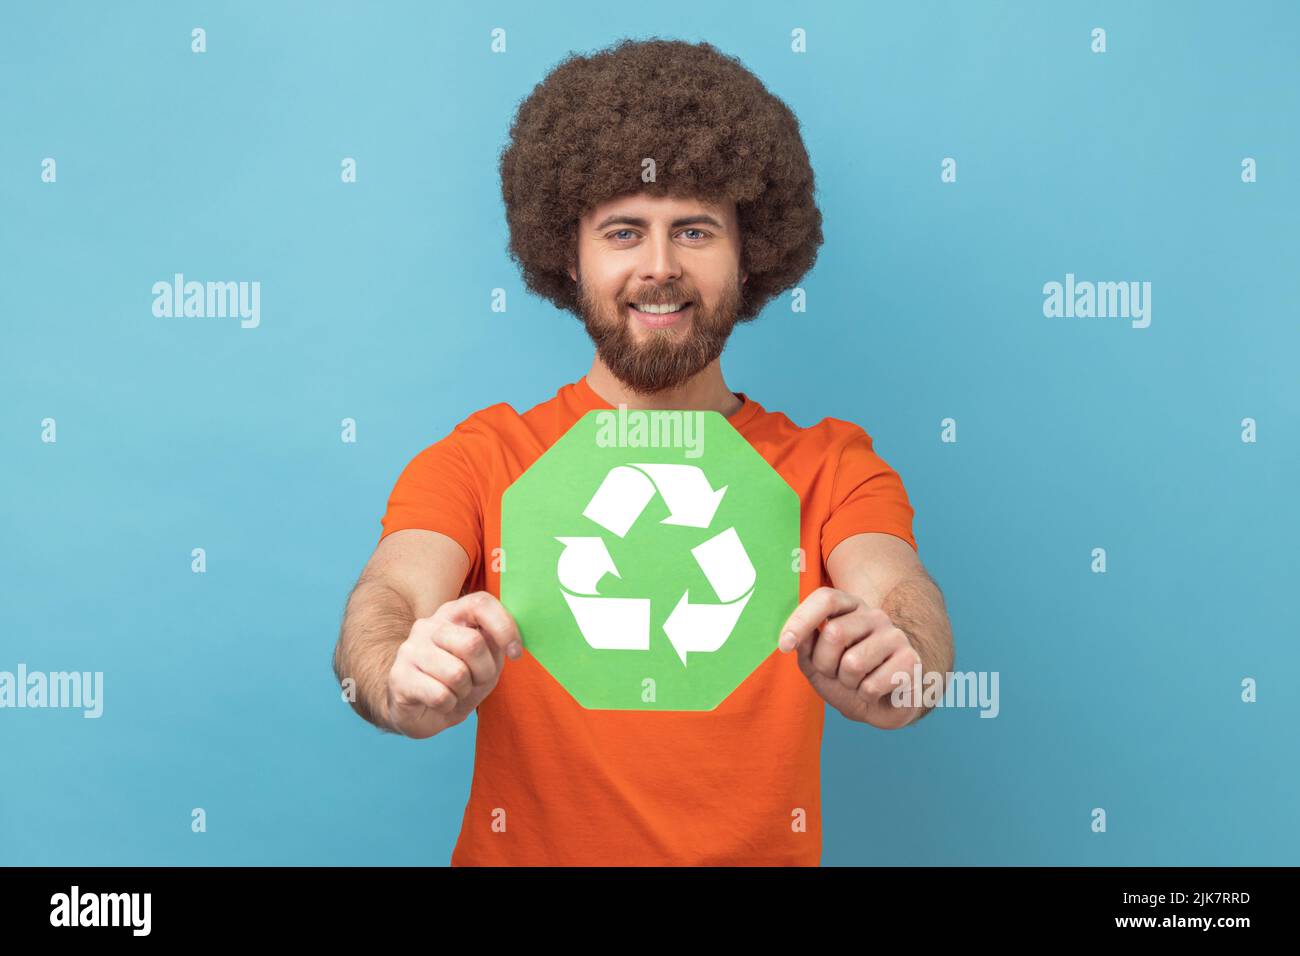 Portrait of man with Afro hairstyle in orange T-shirt holding waste recycling symbol in his hand, worrying about ecology and environmental pollution. Indoor studio shot isolated on blue background. Stock Photo